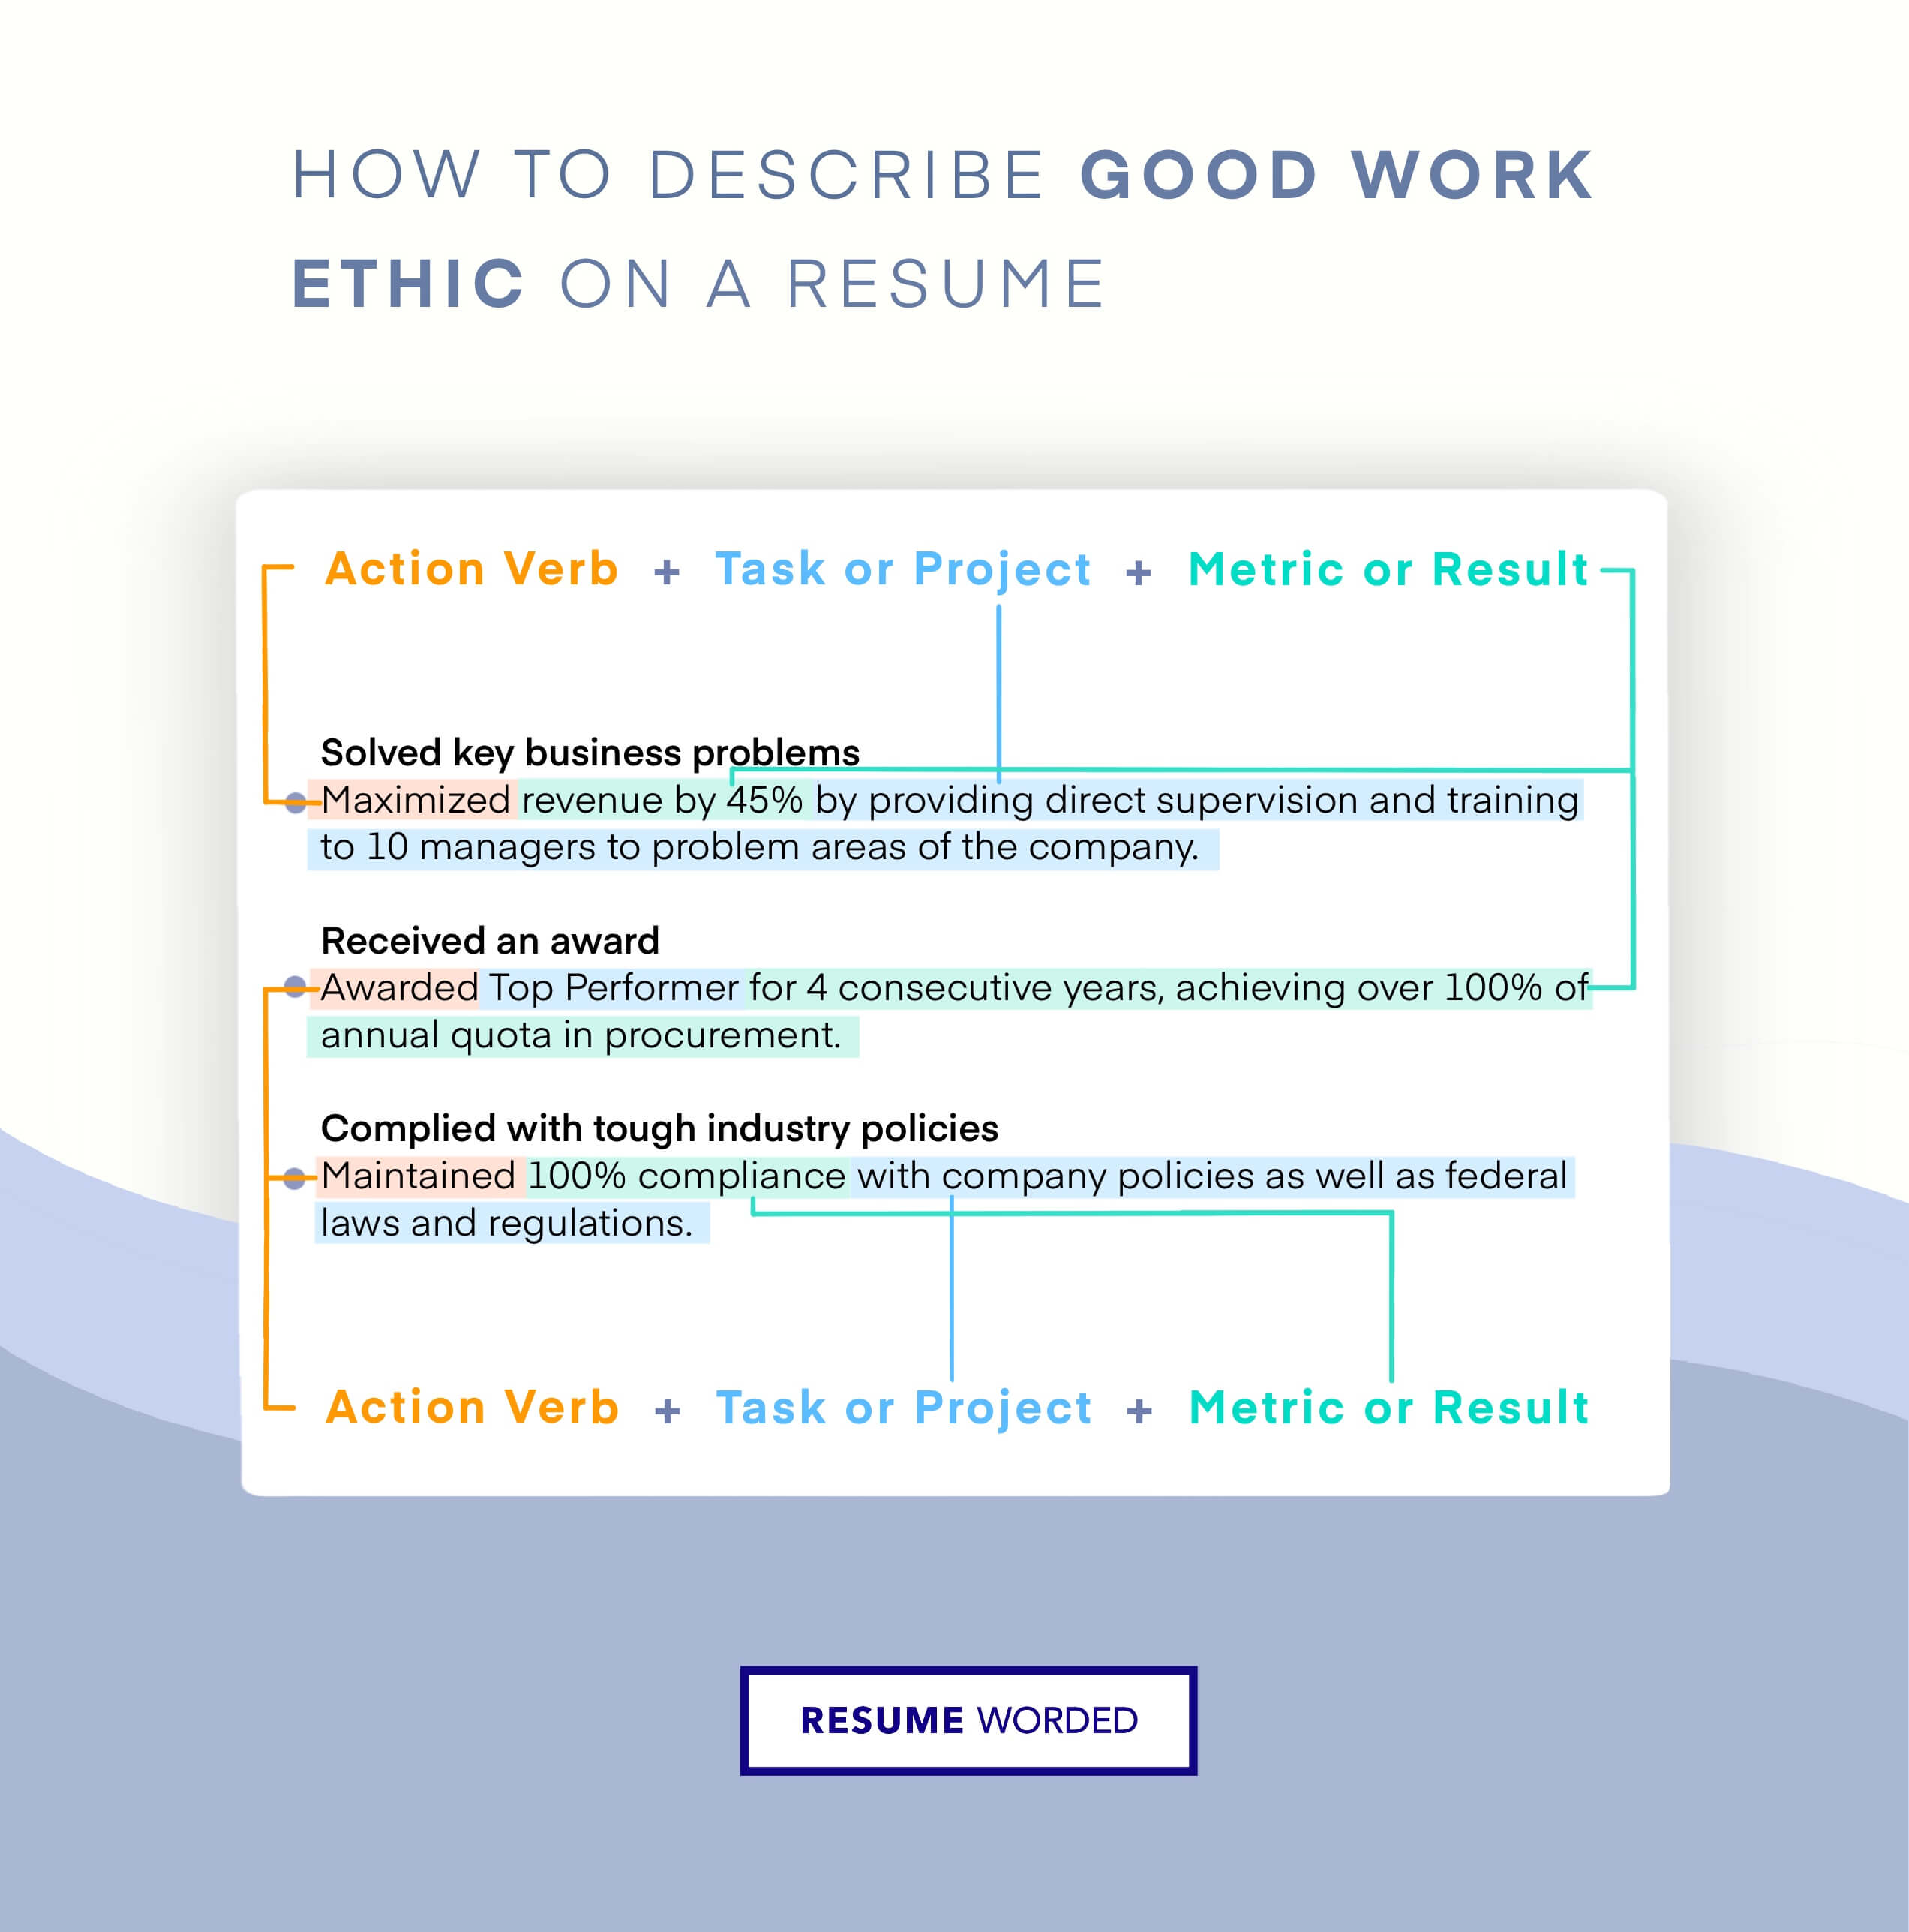 how-to-describe-good-work-ethic-on-a-resume